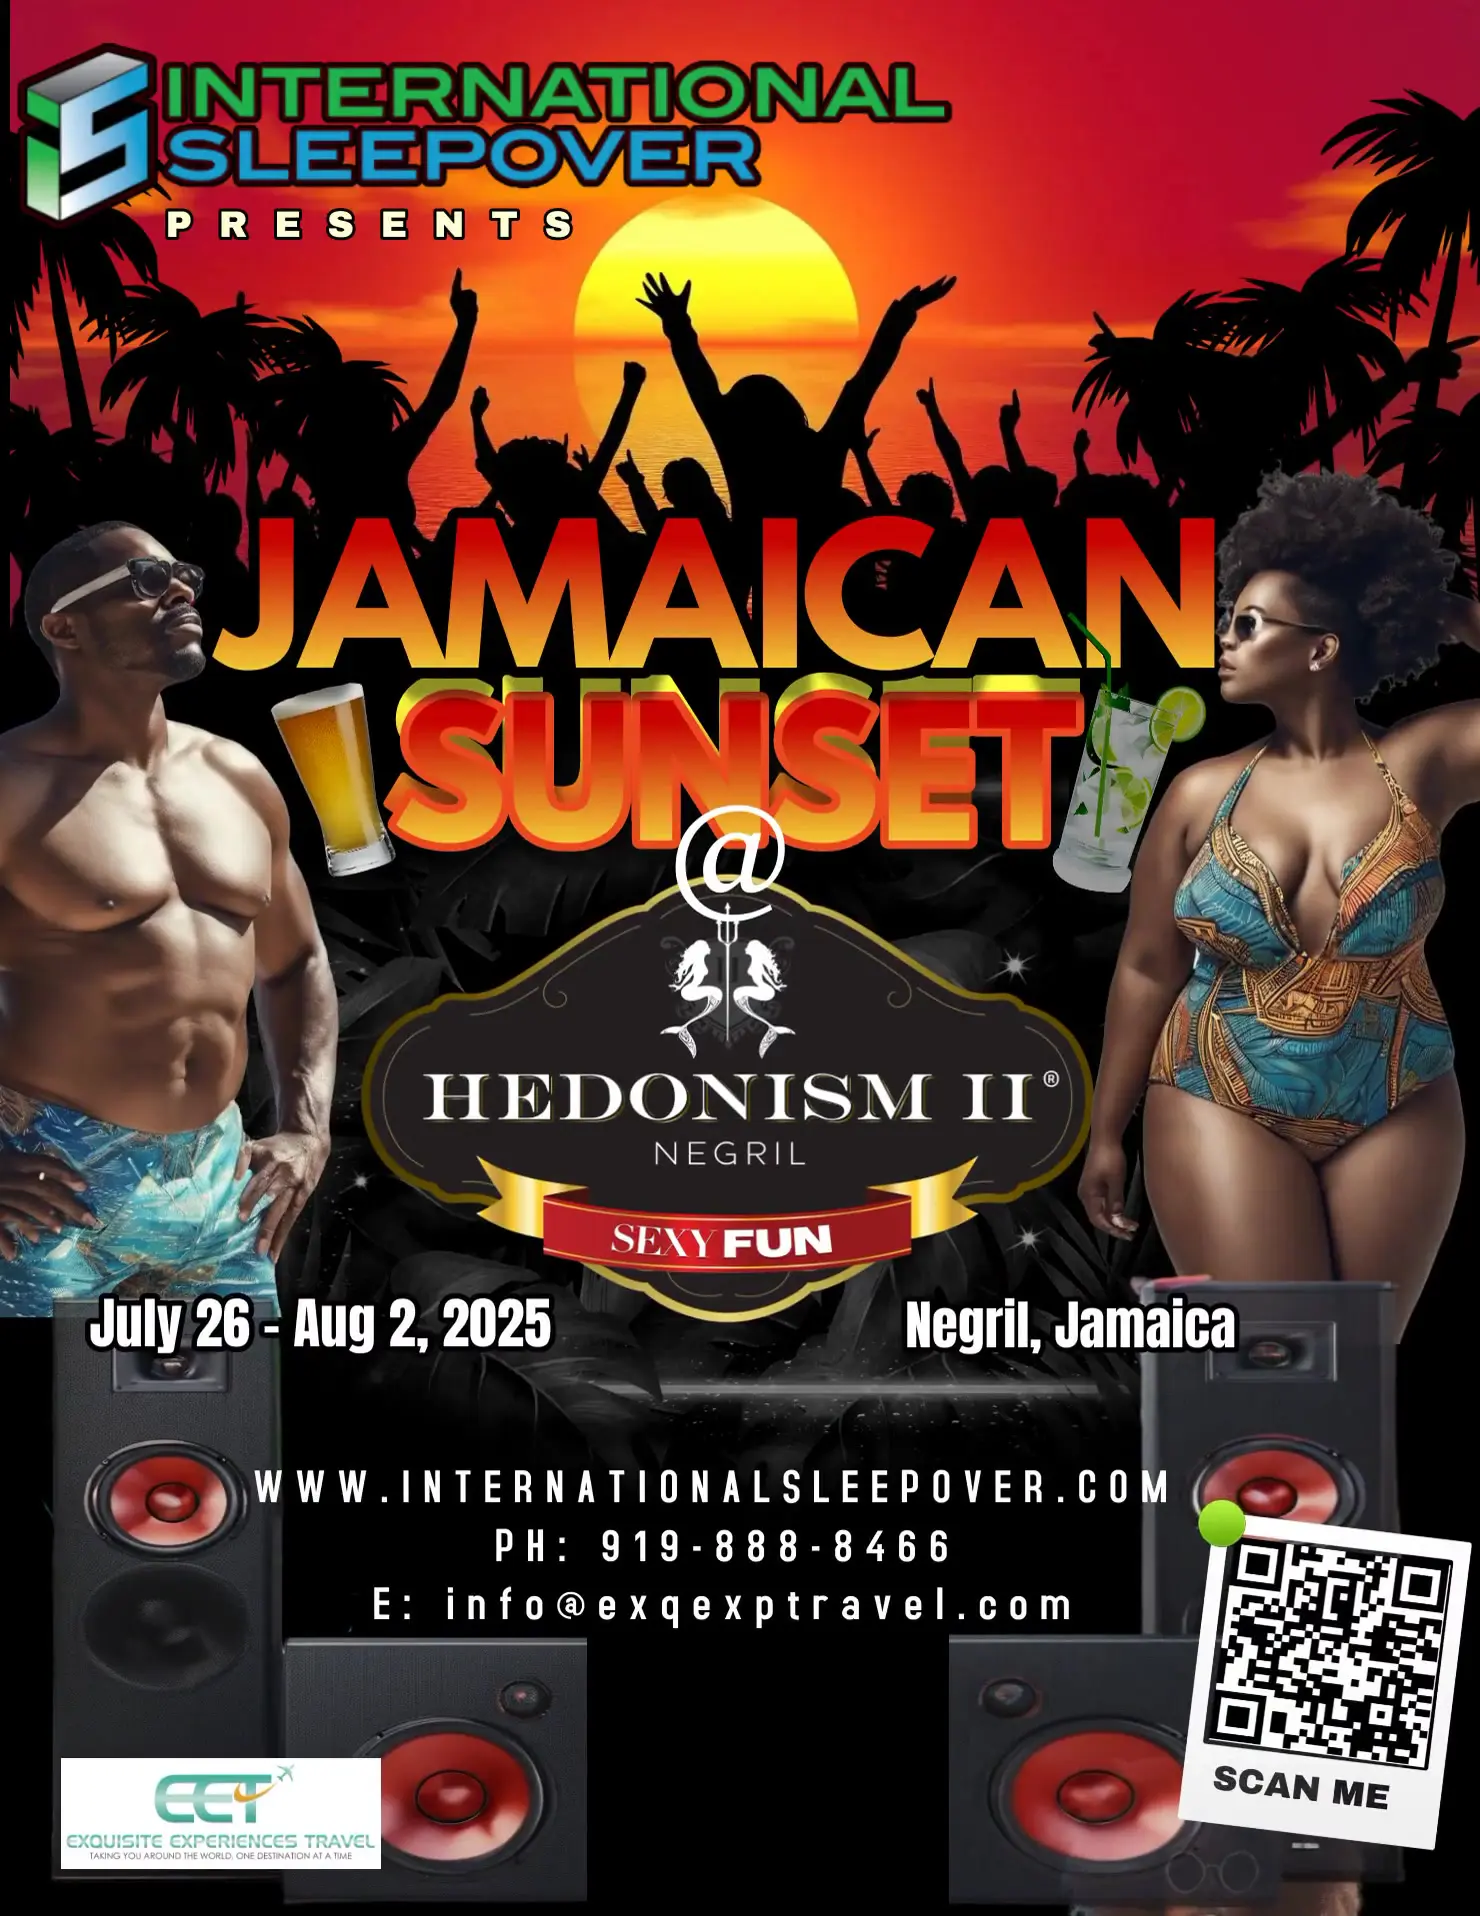 Group Event - Jamaican Sunset - July 26 - August 2, 2025 - Hedonism II Resort, Negril Jamaica